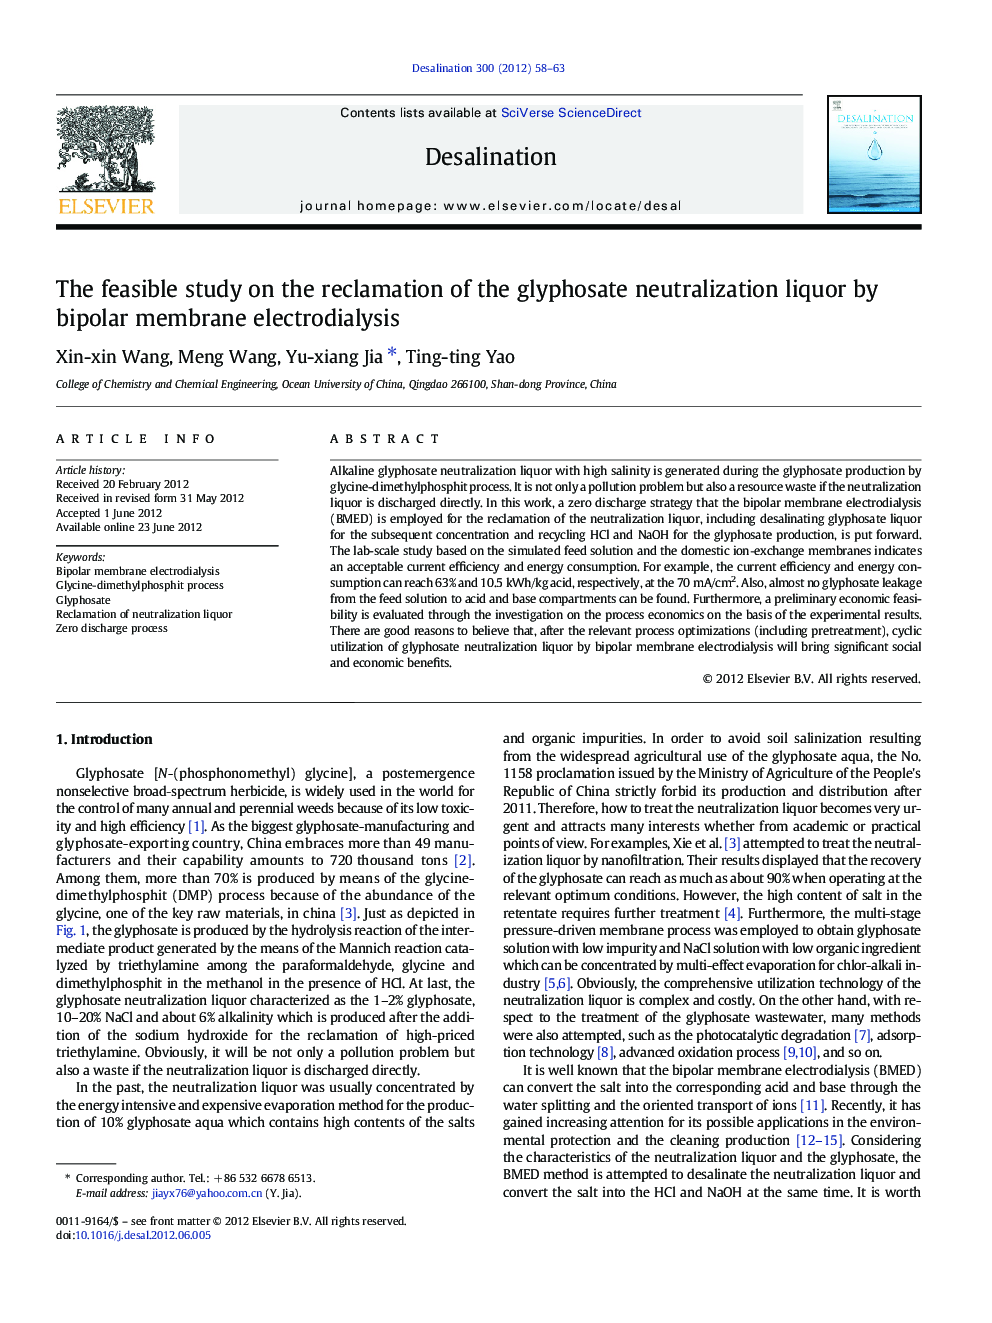 The feasible study on the reclamation of the glyphosate neutralization liquor by bipolar membrane electrodialysis